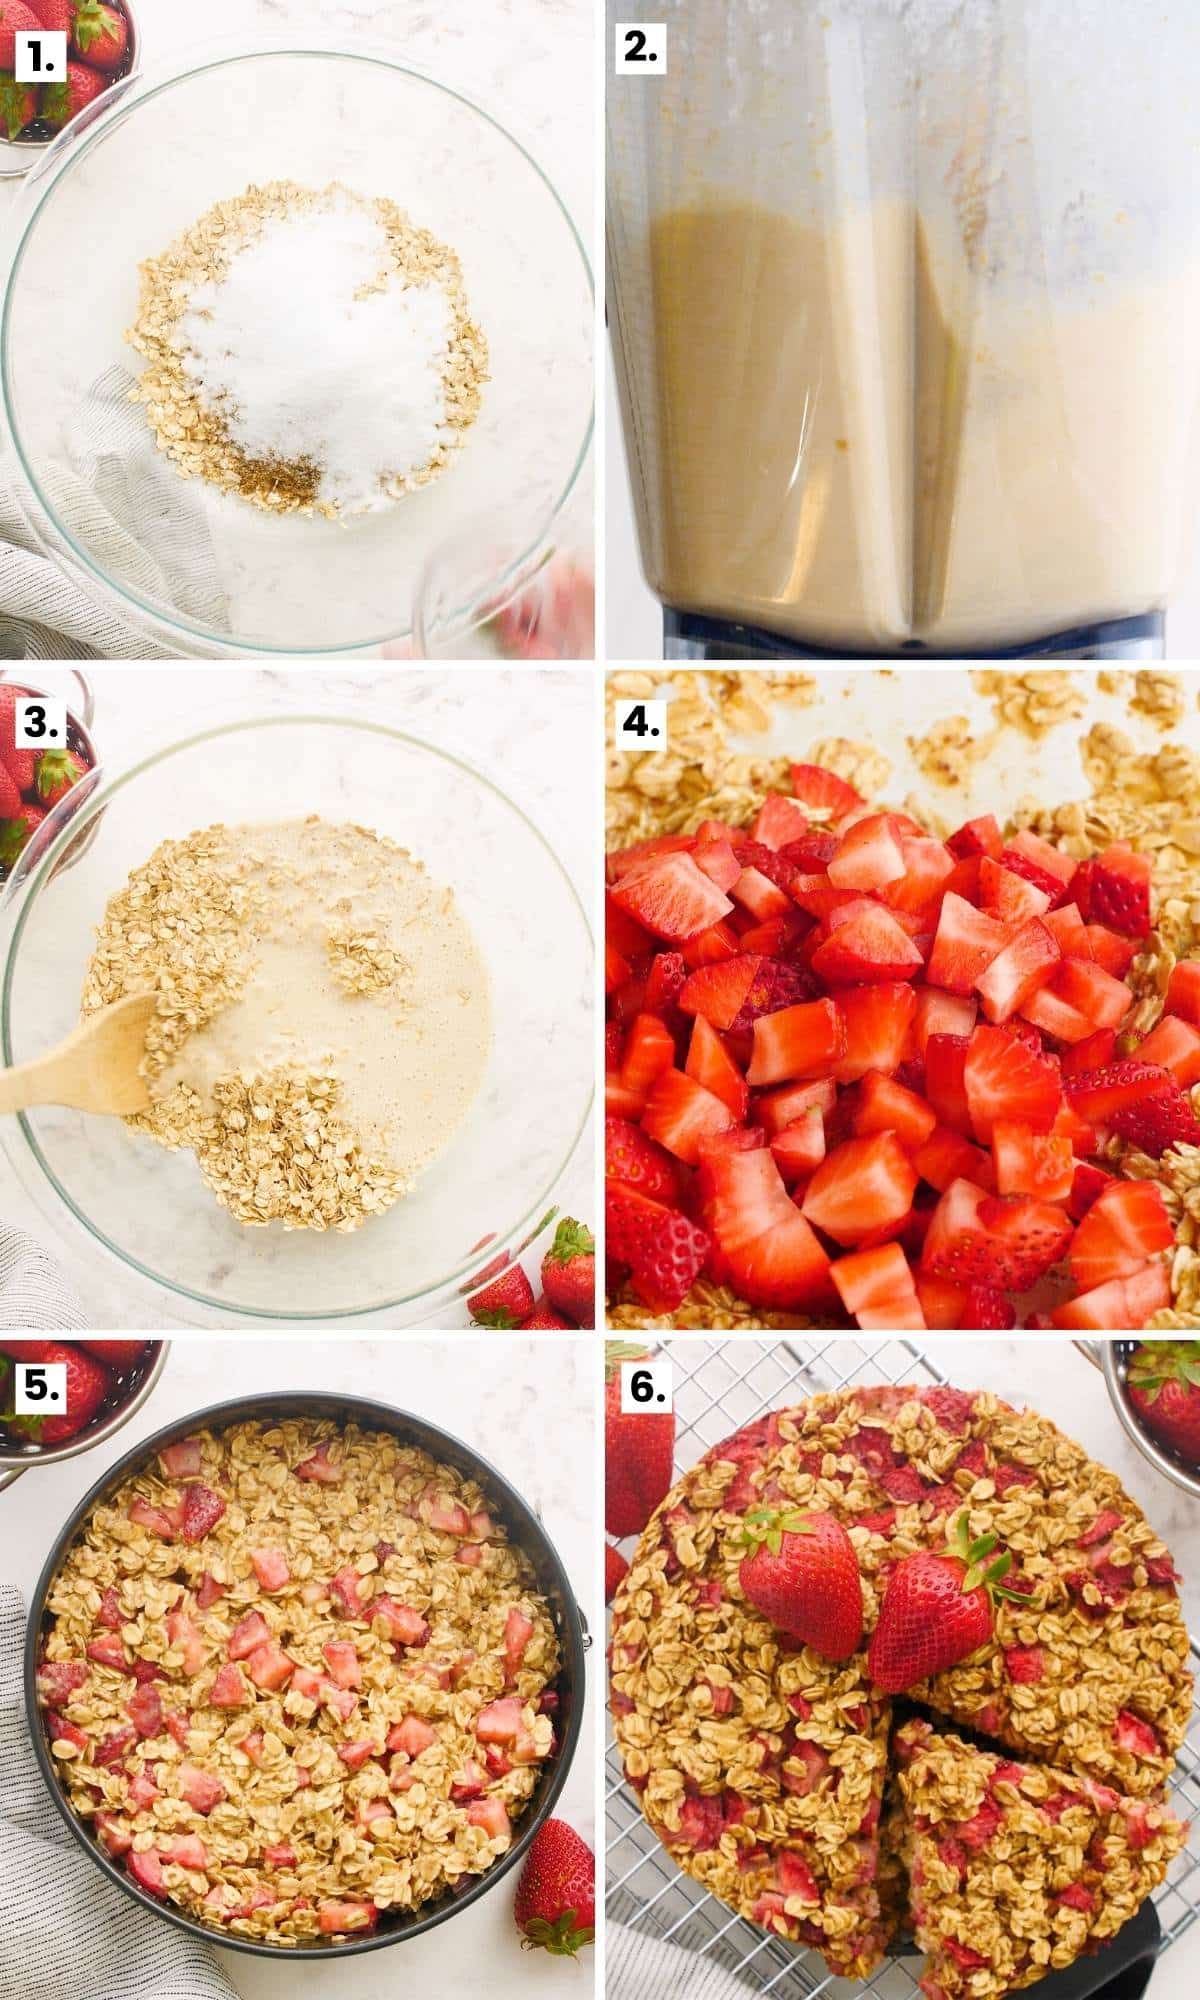 how to make strawberry baked oatmeal step-by-step as per the written instructions